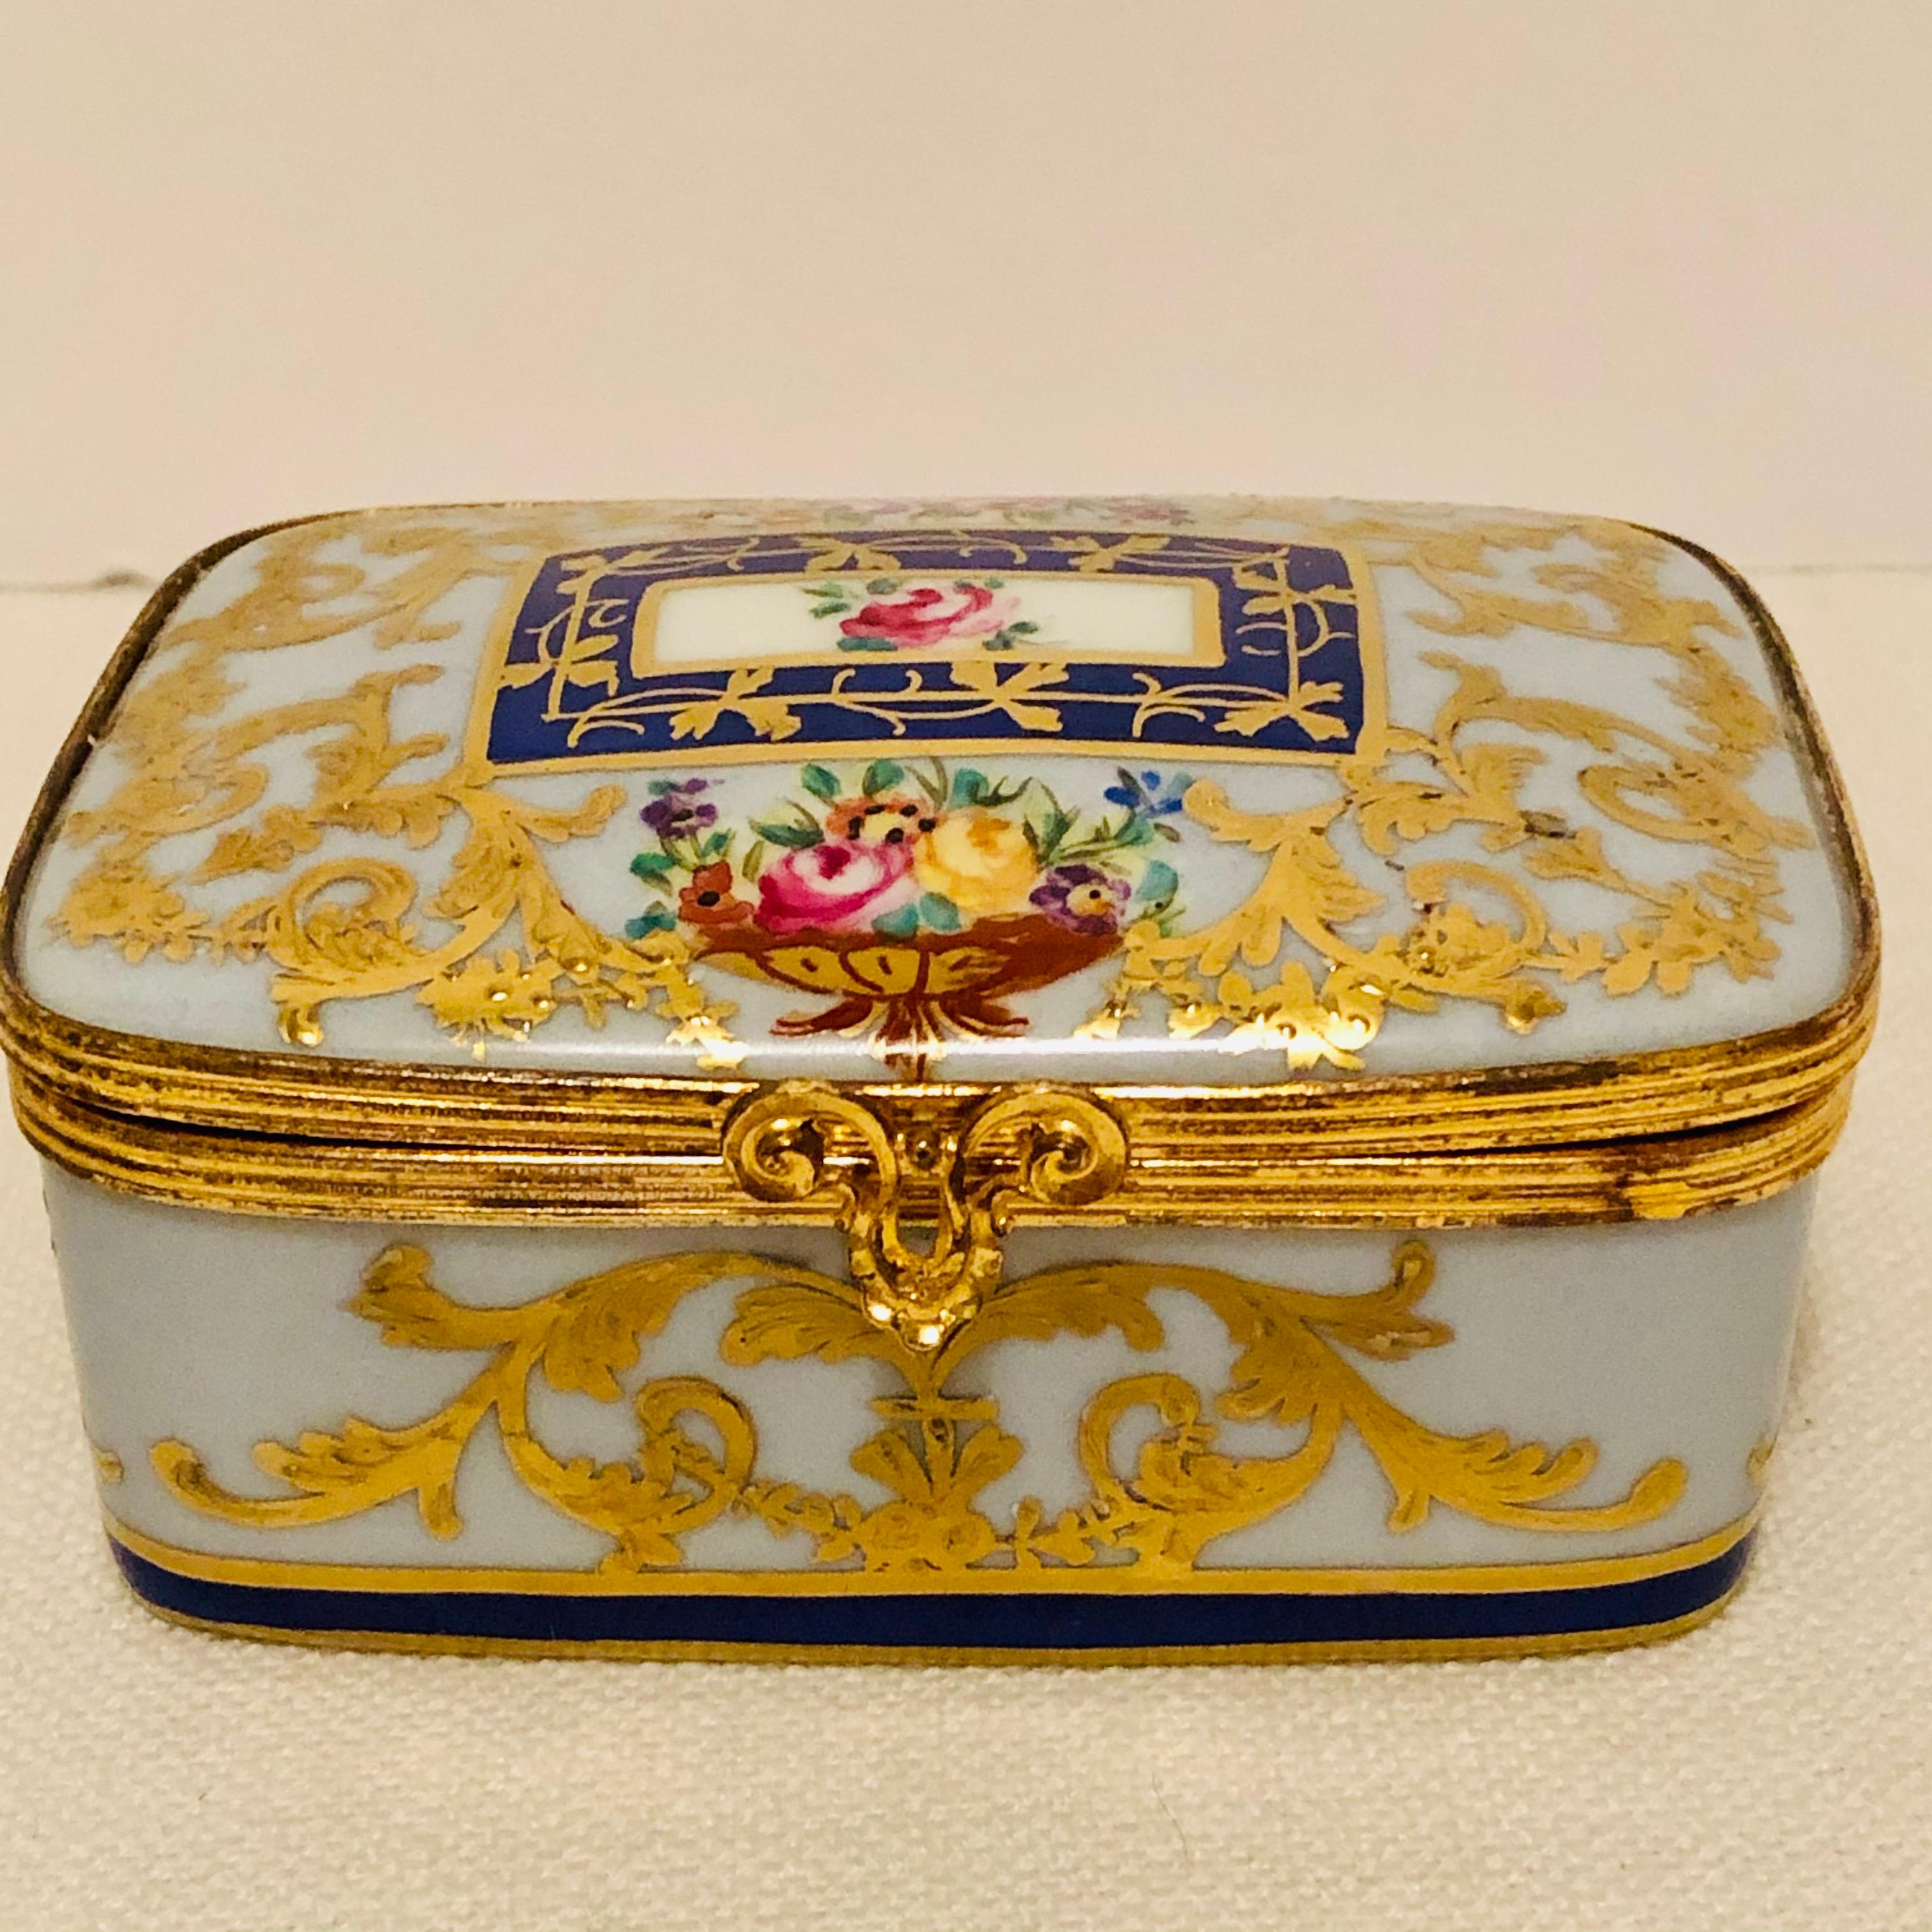 French Le Tallec Porcelain Box with Decorated with Flower Bouquets and Raised Gilding